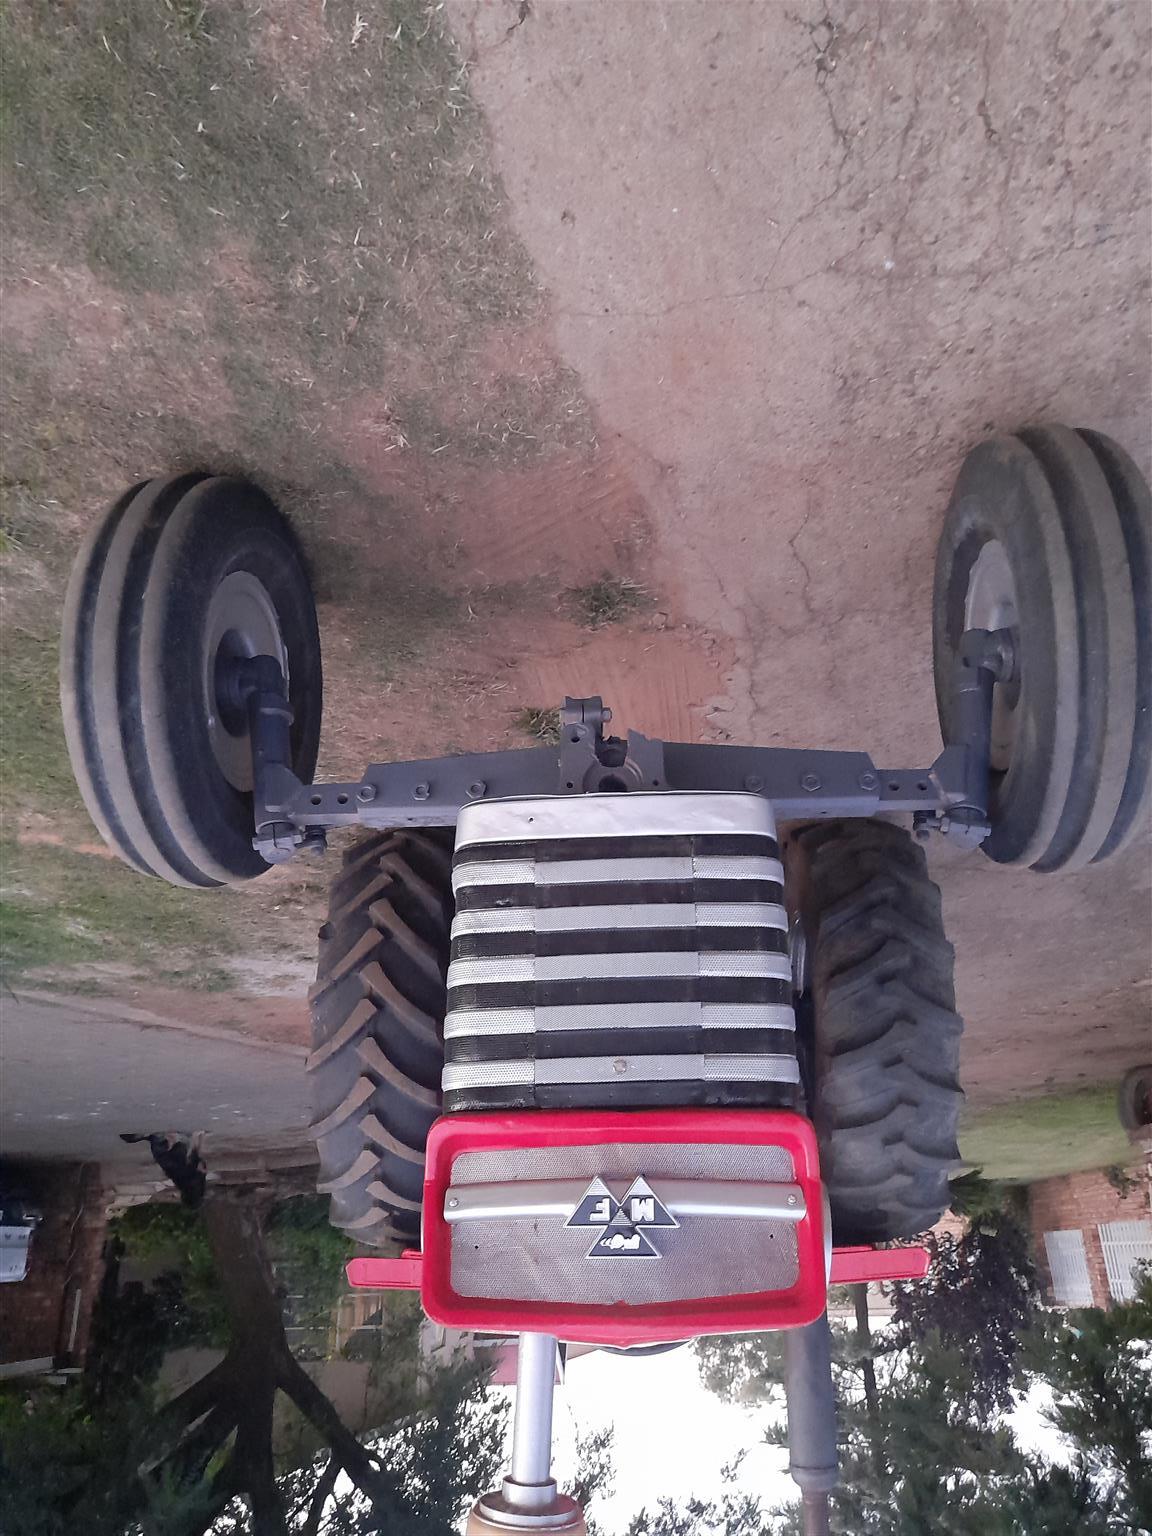 Massey Ferguson 165 in excellent condition.  Ready to work.